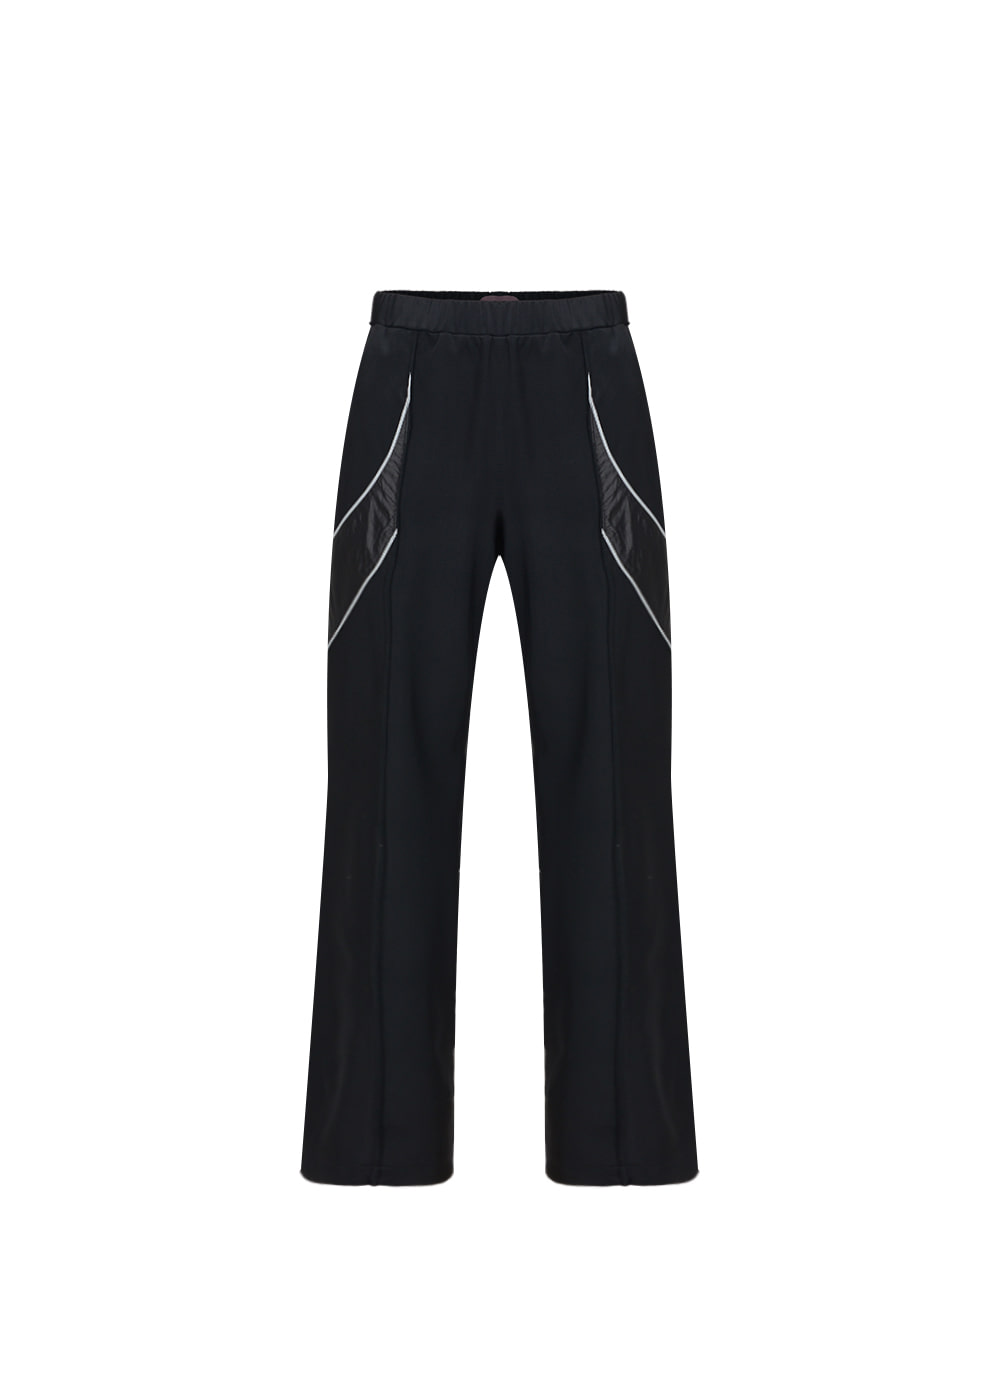 CURVED LINE TRACK PANTS